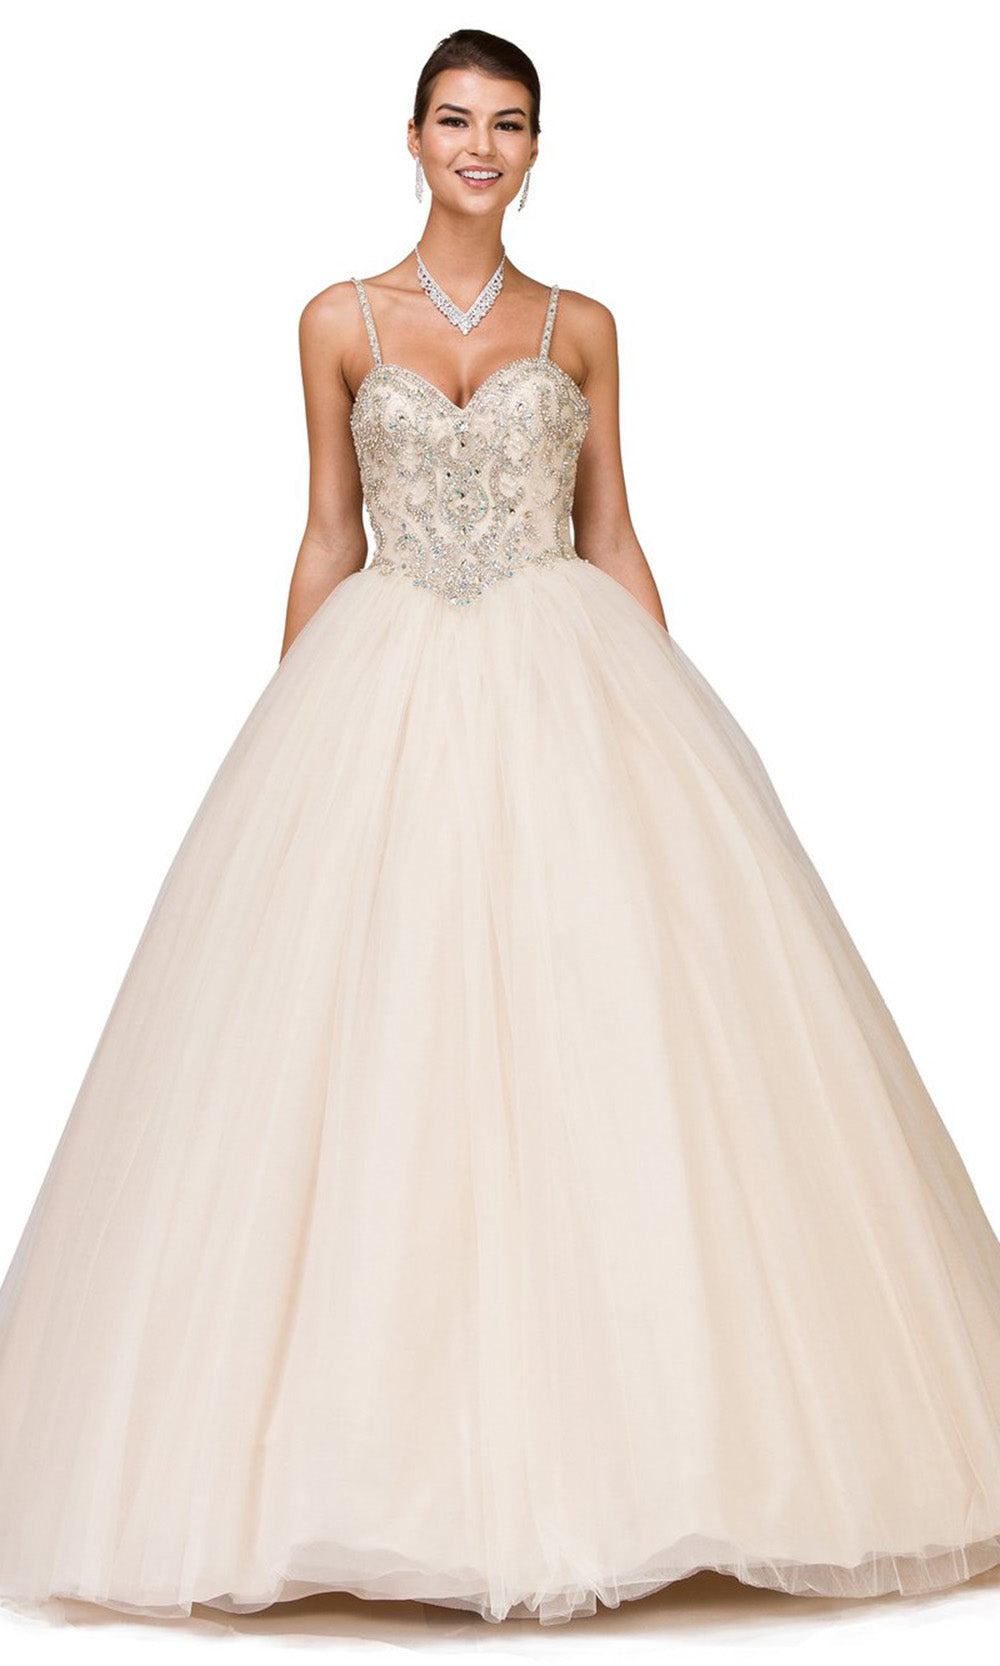 Dancing Queen - 1174 Jeweled Sweetheart Bodice Ballgown In Champagne & Gold